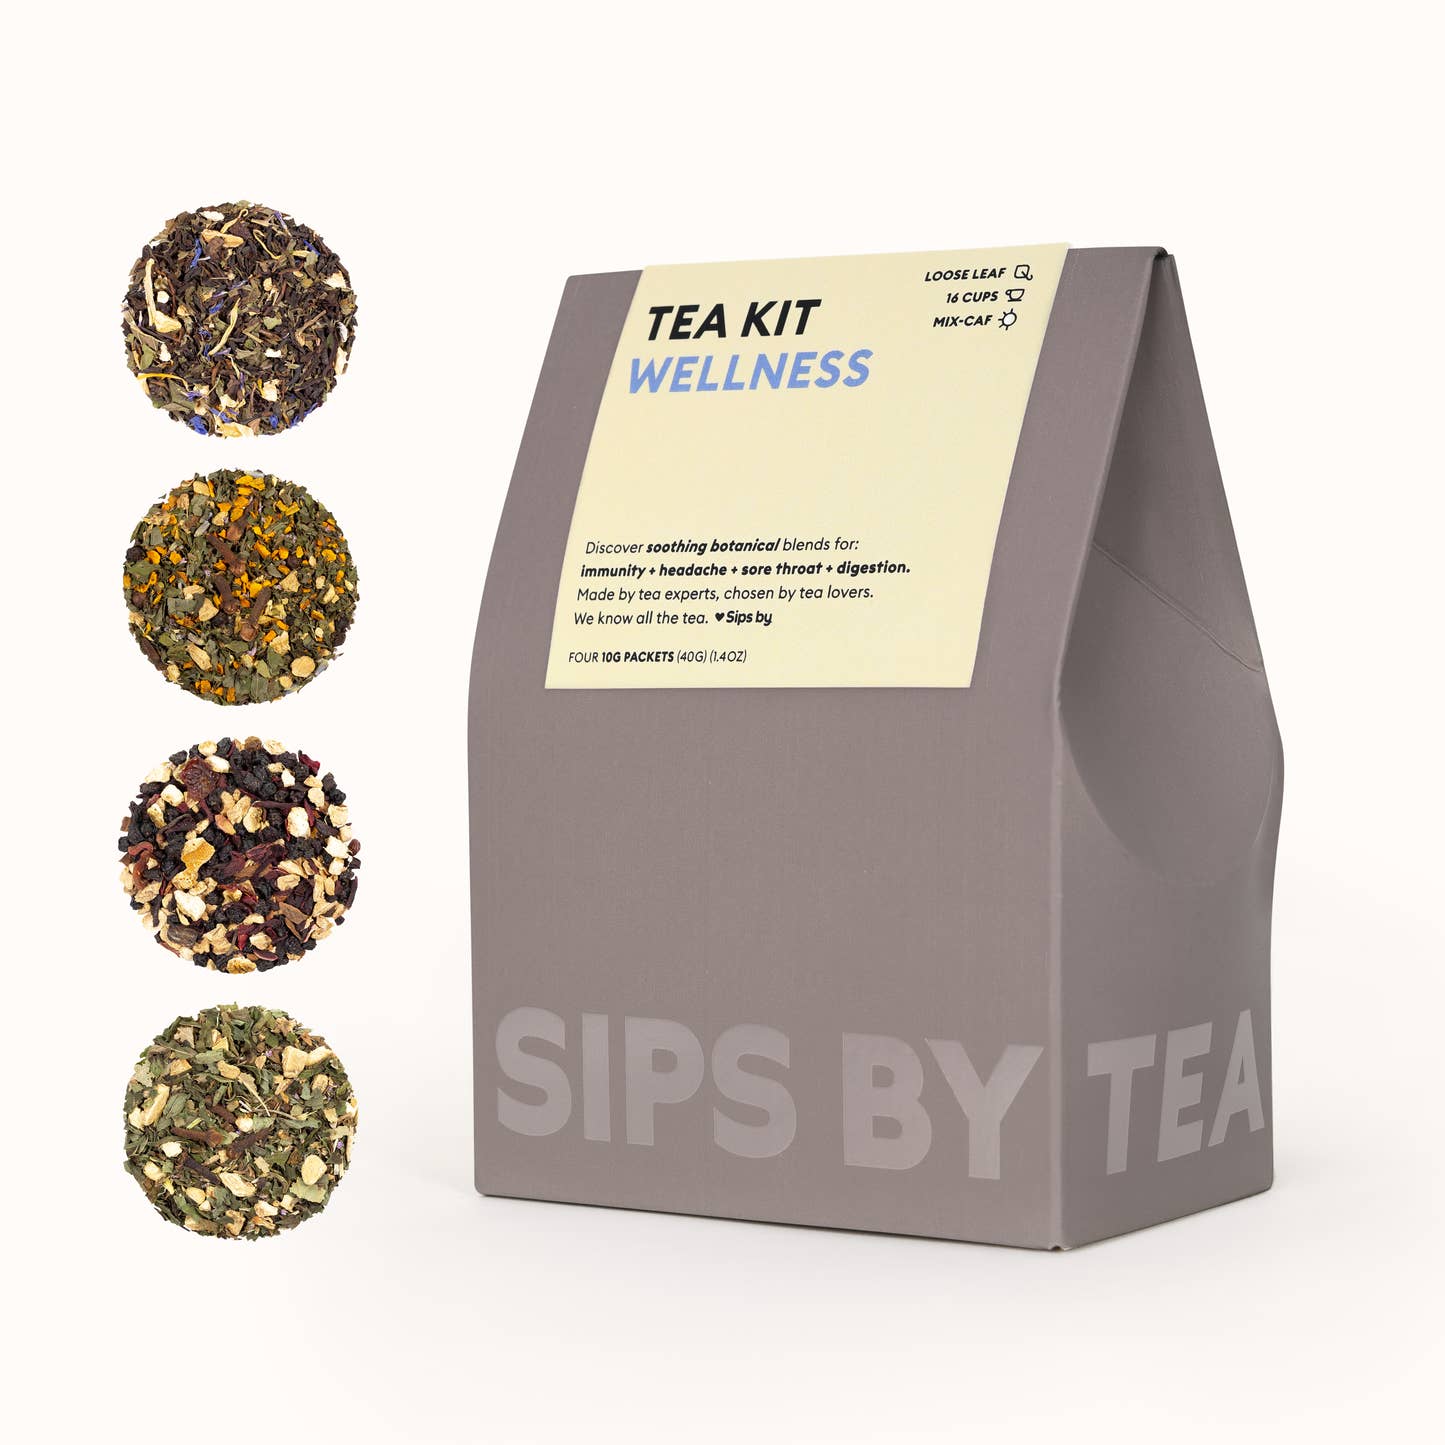 Gray box with a light green topper and blue print that says "Wellness Tea Kit - Made by tea experts, chosen by tea lovers. We know all the tea. Love Sips by. Makes 16 Cups. Four 10G Packets (40G) (1.4OZ)"